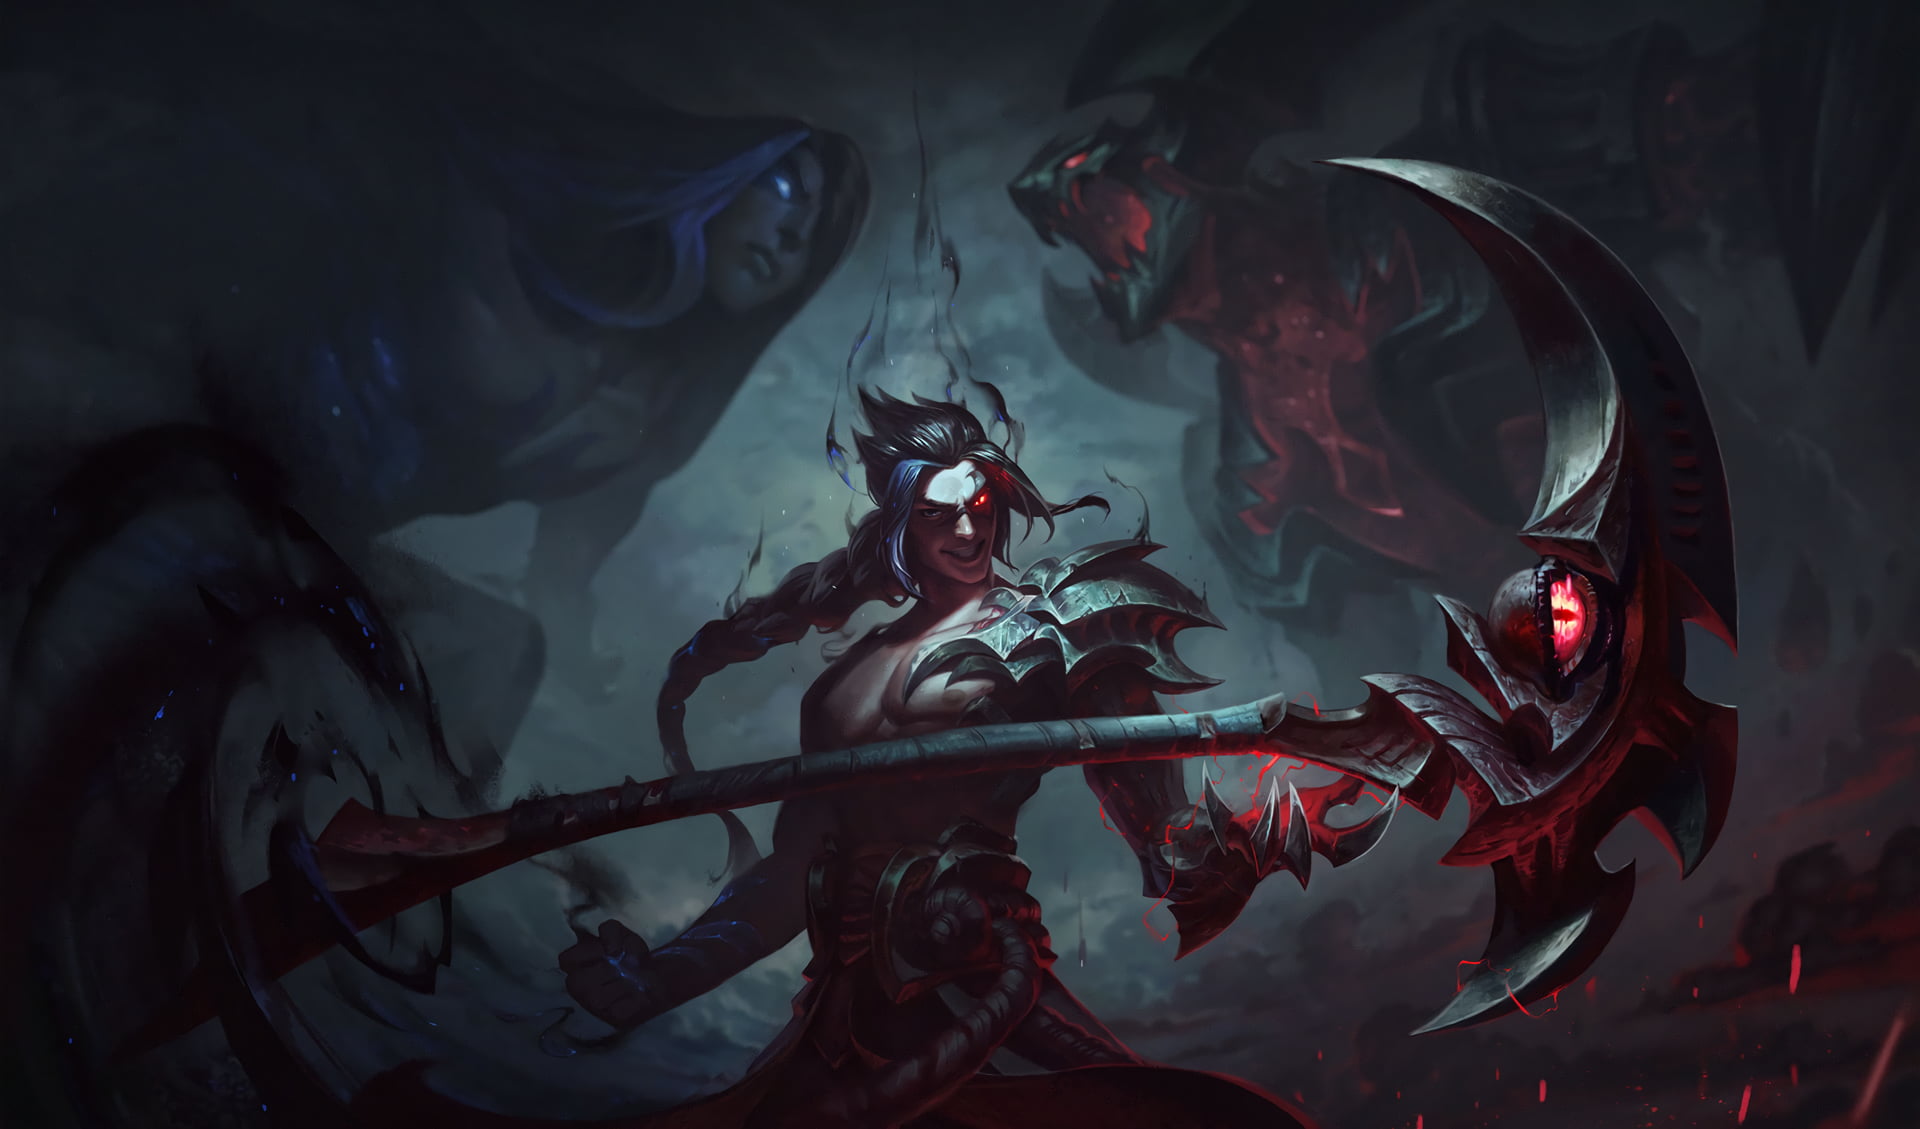 man with scythe weapon graphic poster, Kayn (League of Legends), fantasy weapon, League of Legends, Summoner's Rift